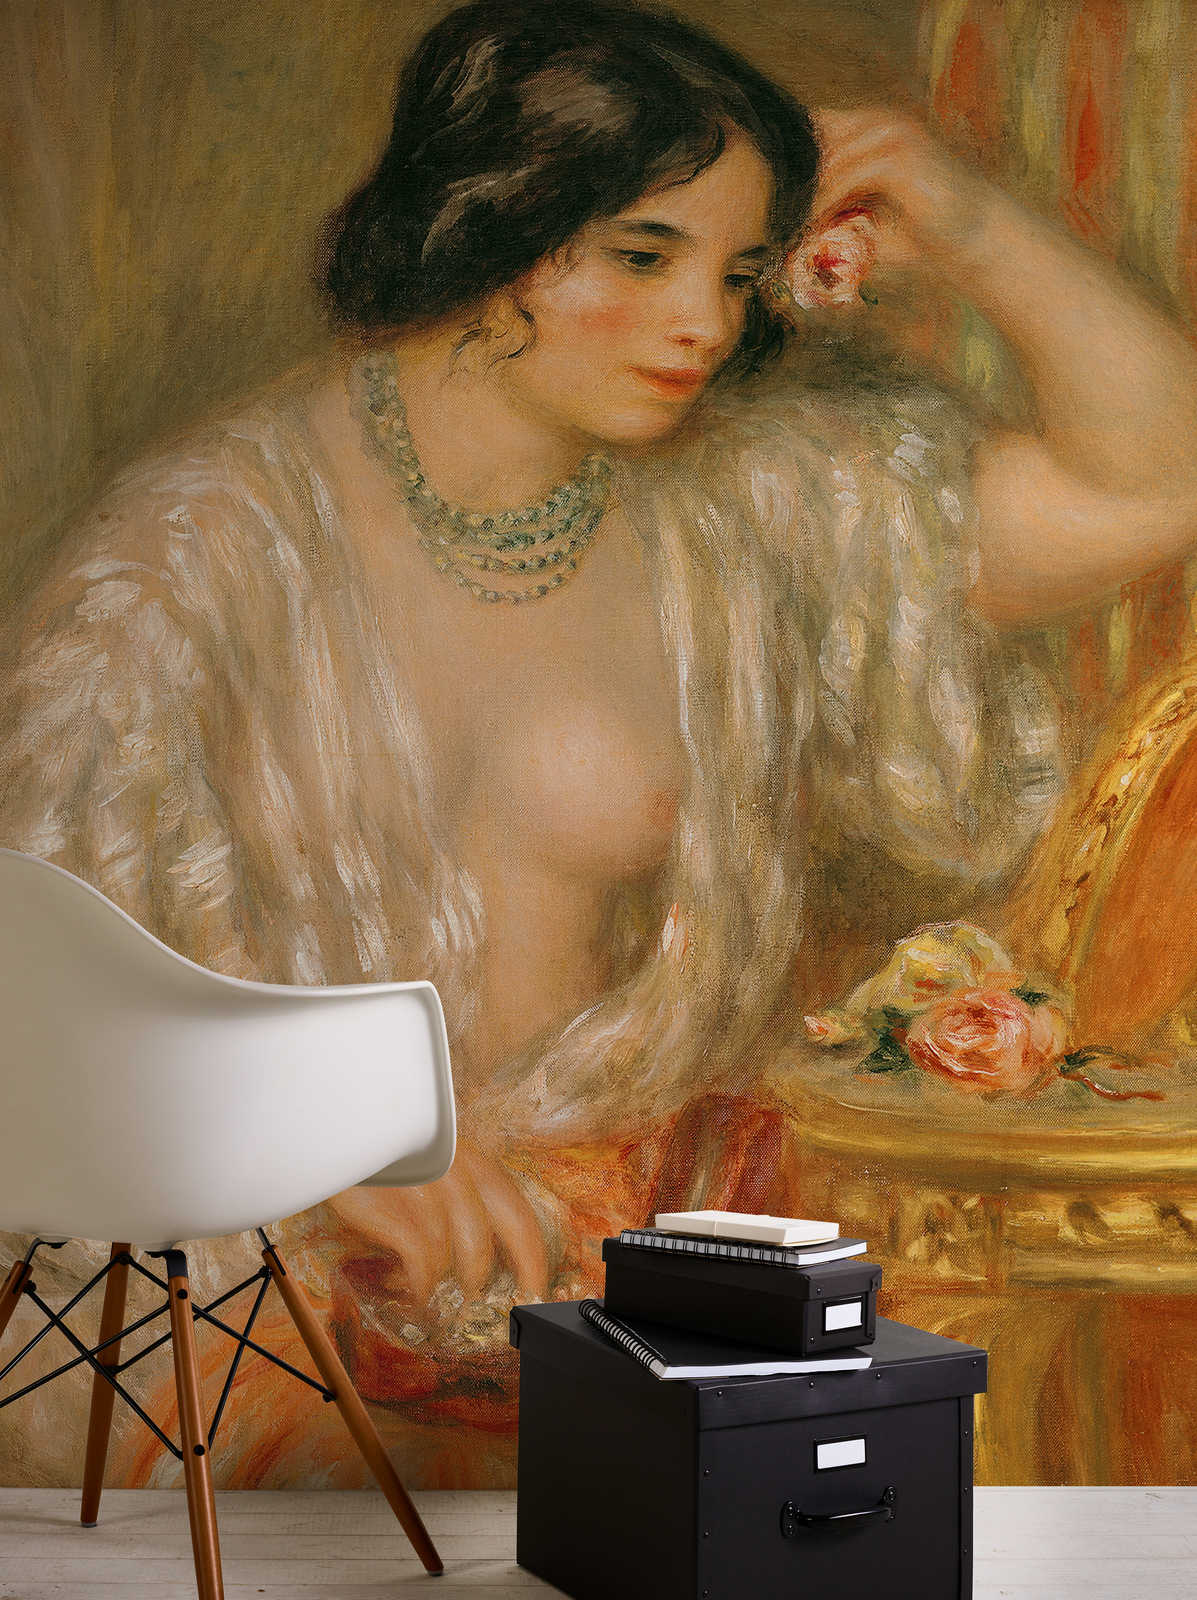             Photo wallpaper "Gabrielle with jewelry box" by Pierre Auguste Renoir
        